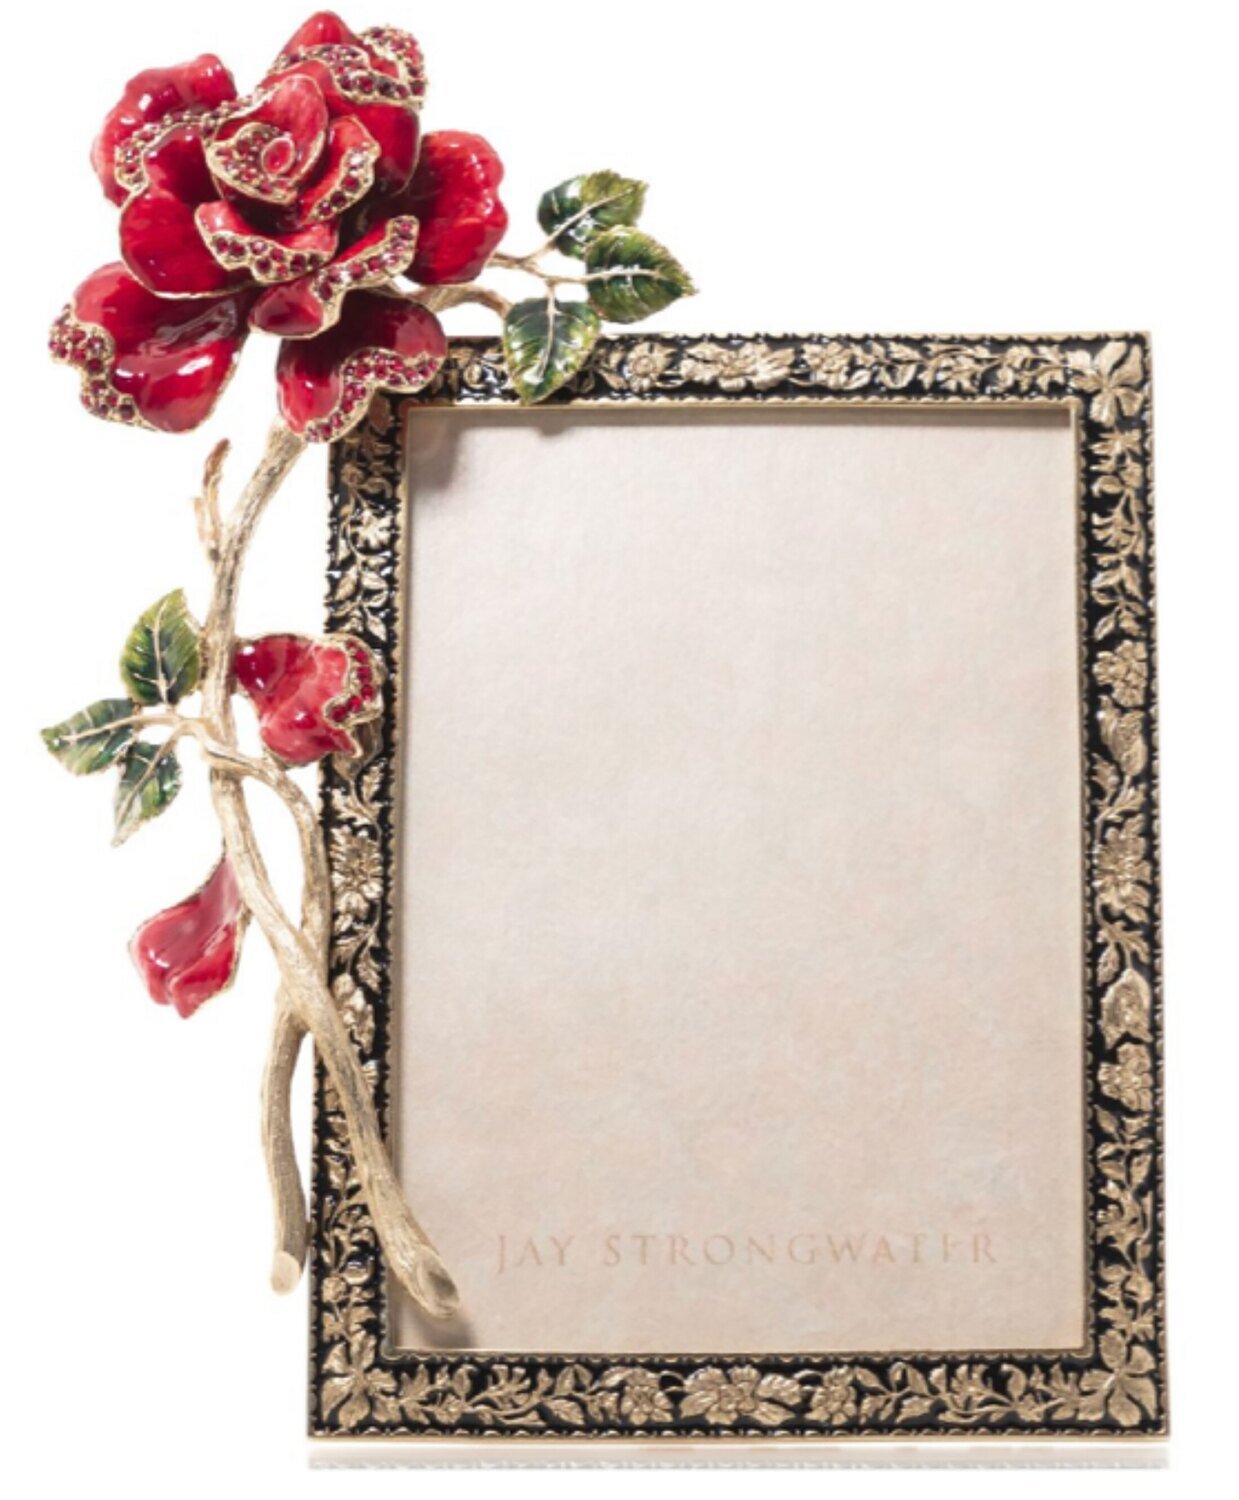 Jay Strongwater Kaylee 3 x 4 Night Bloom Rose Picture Frame SPF5869-250